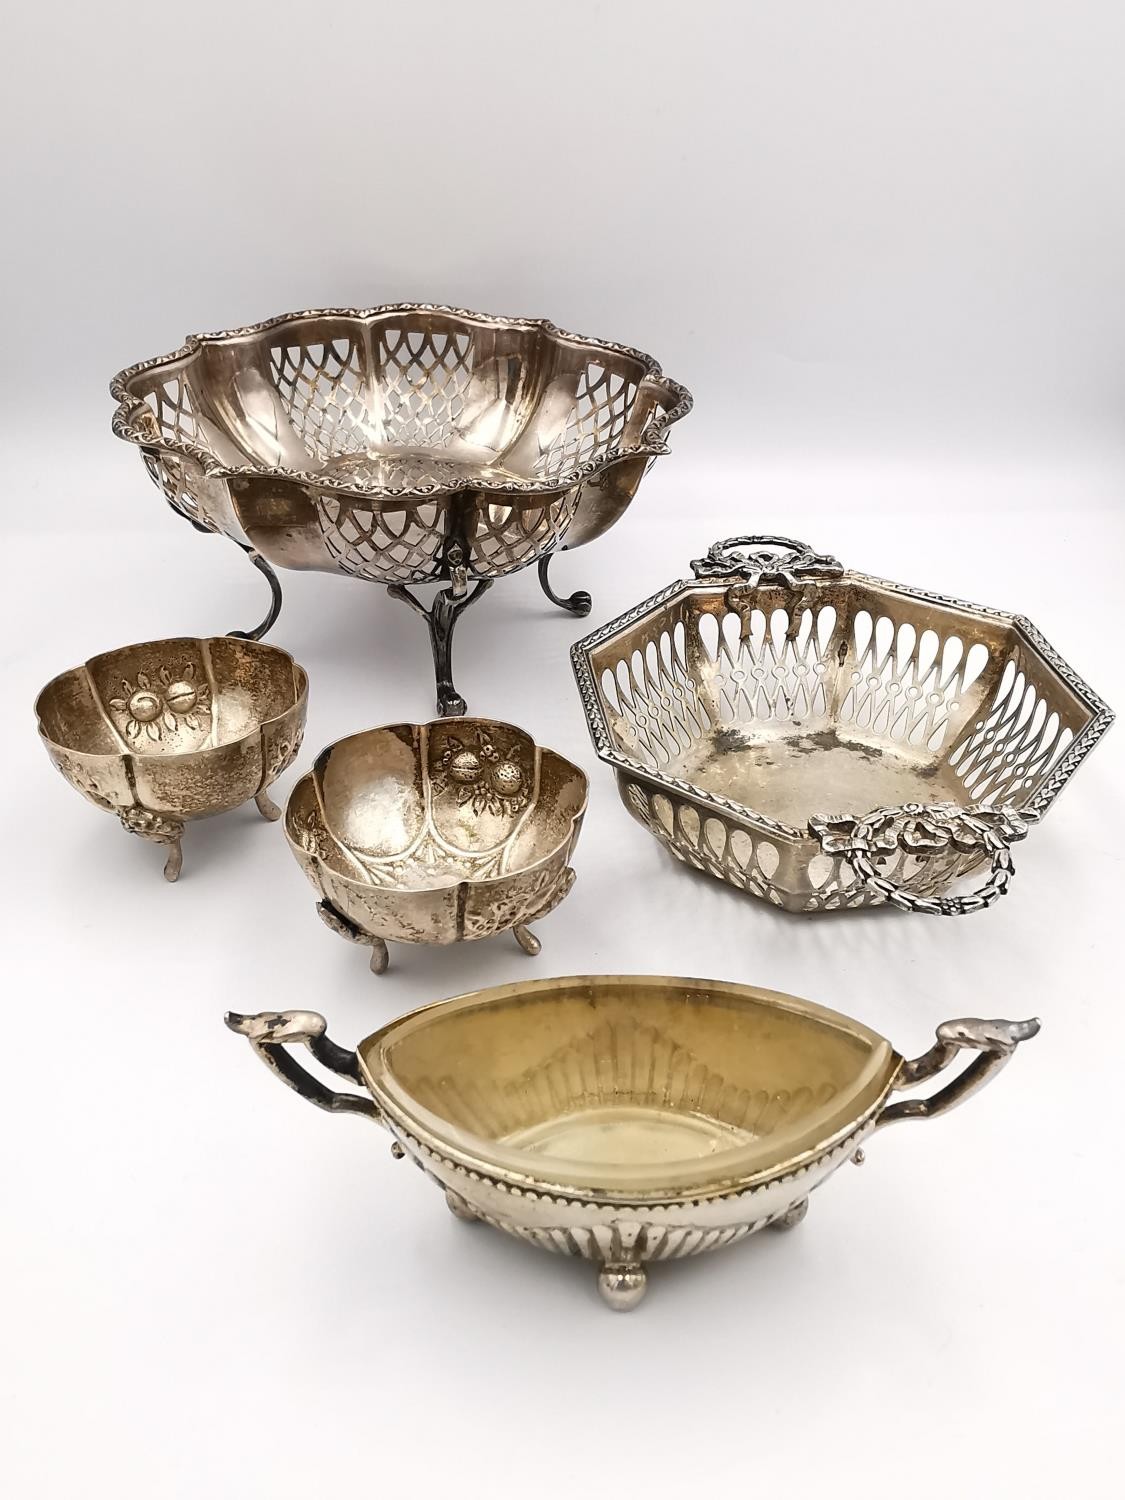 A collection of silver salts and bon bon dishes, including a pair of repousse rose design salts by